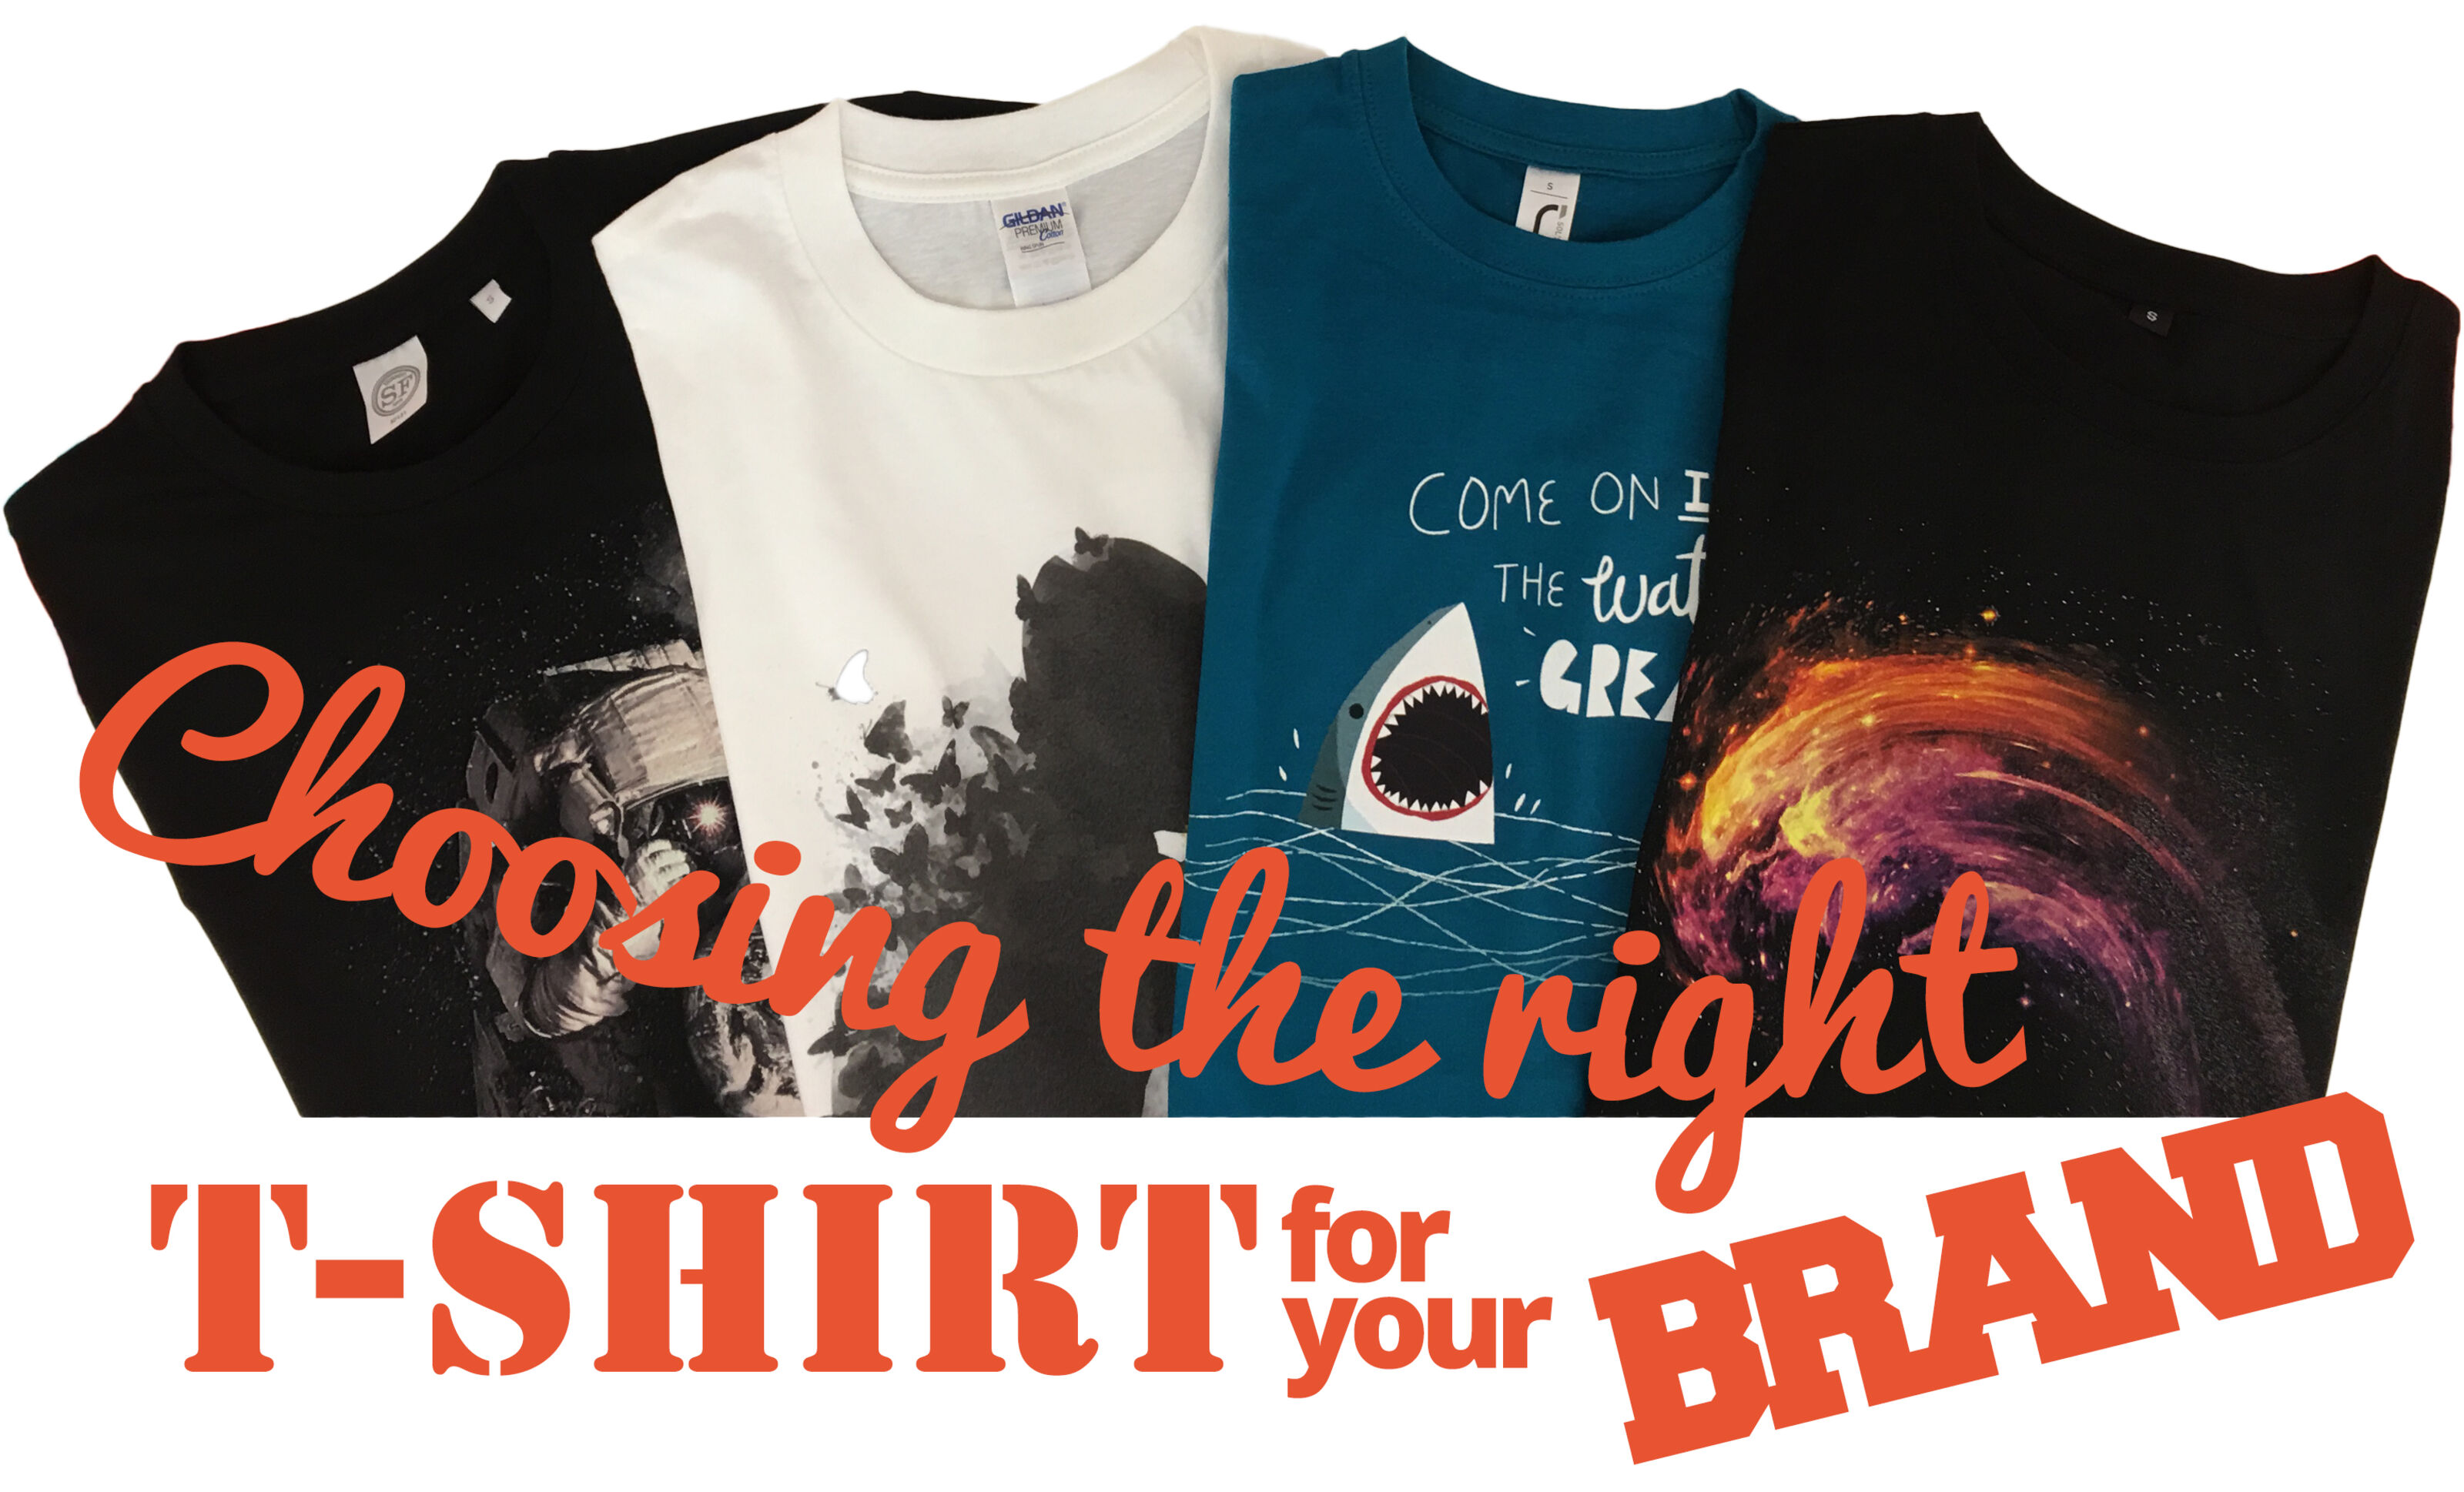 Choosing the right t-shirt for your brand